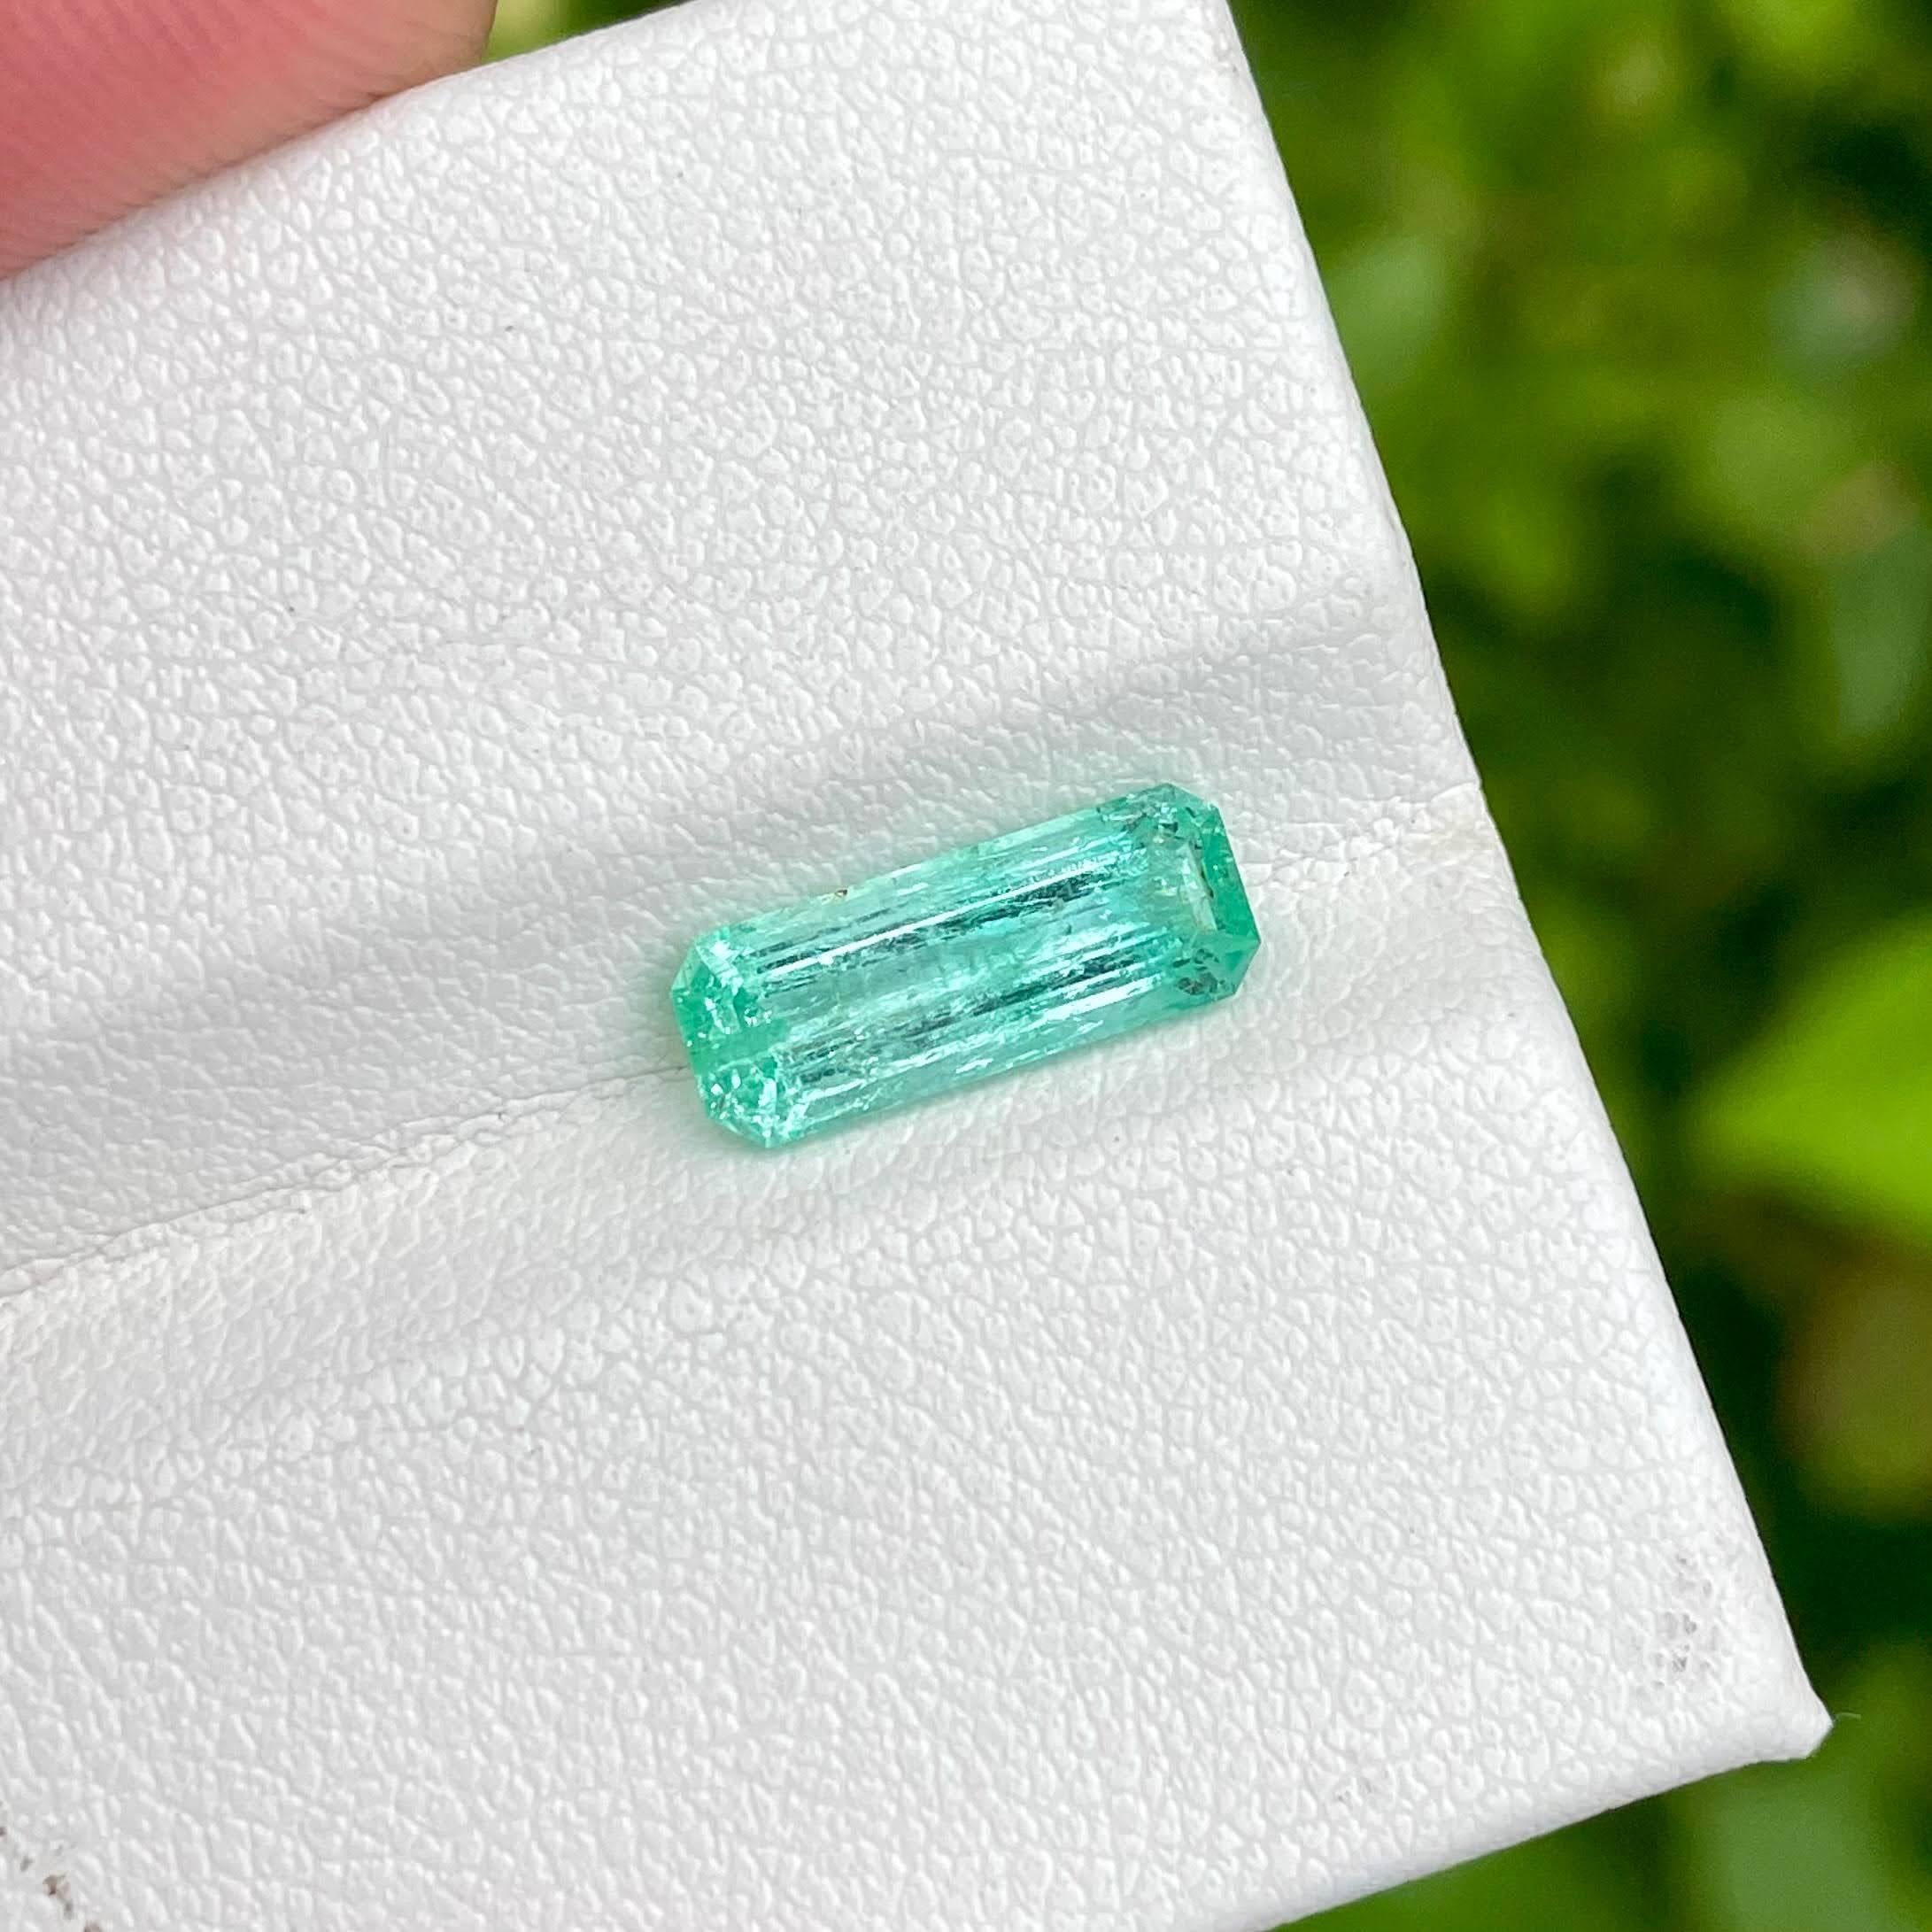 Modern 1.65 Carats Emerald Stone Emerald Cut Natural Gemstone From Afghanistan For Sale